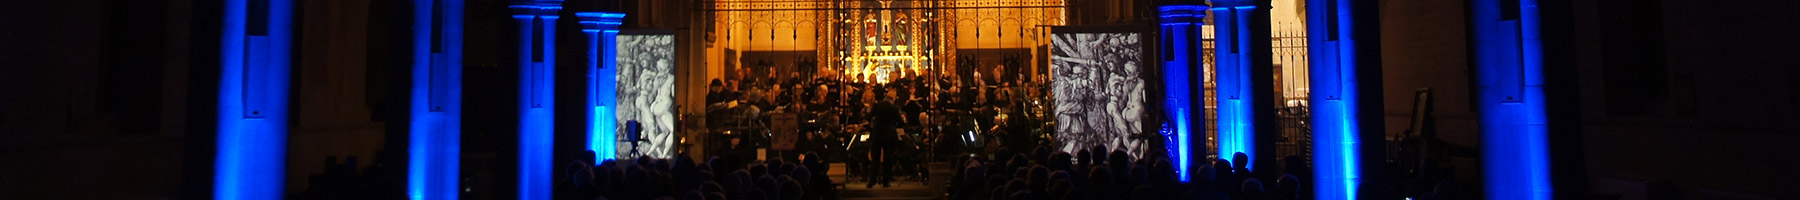 a performance of St. Matthew Passion in a church